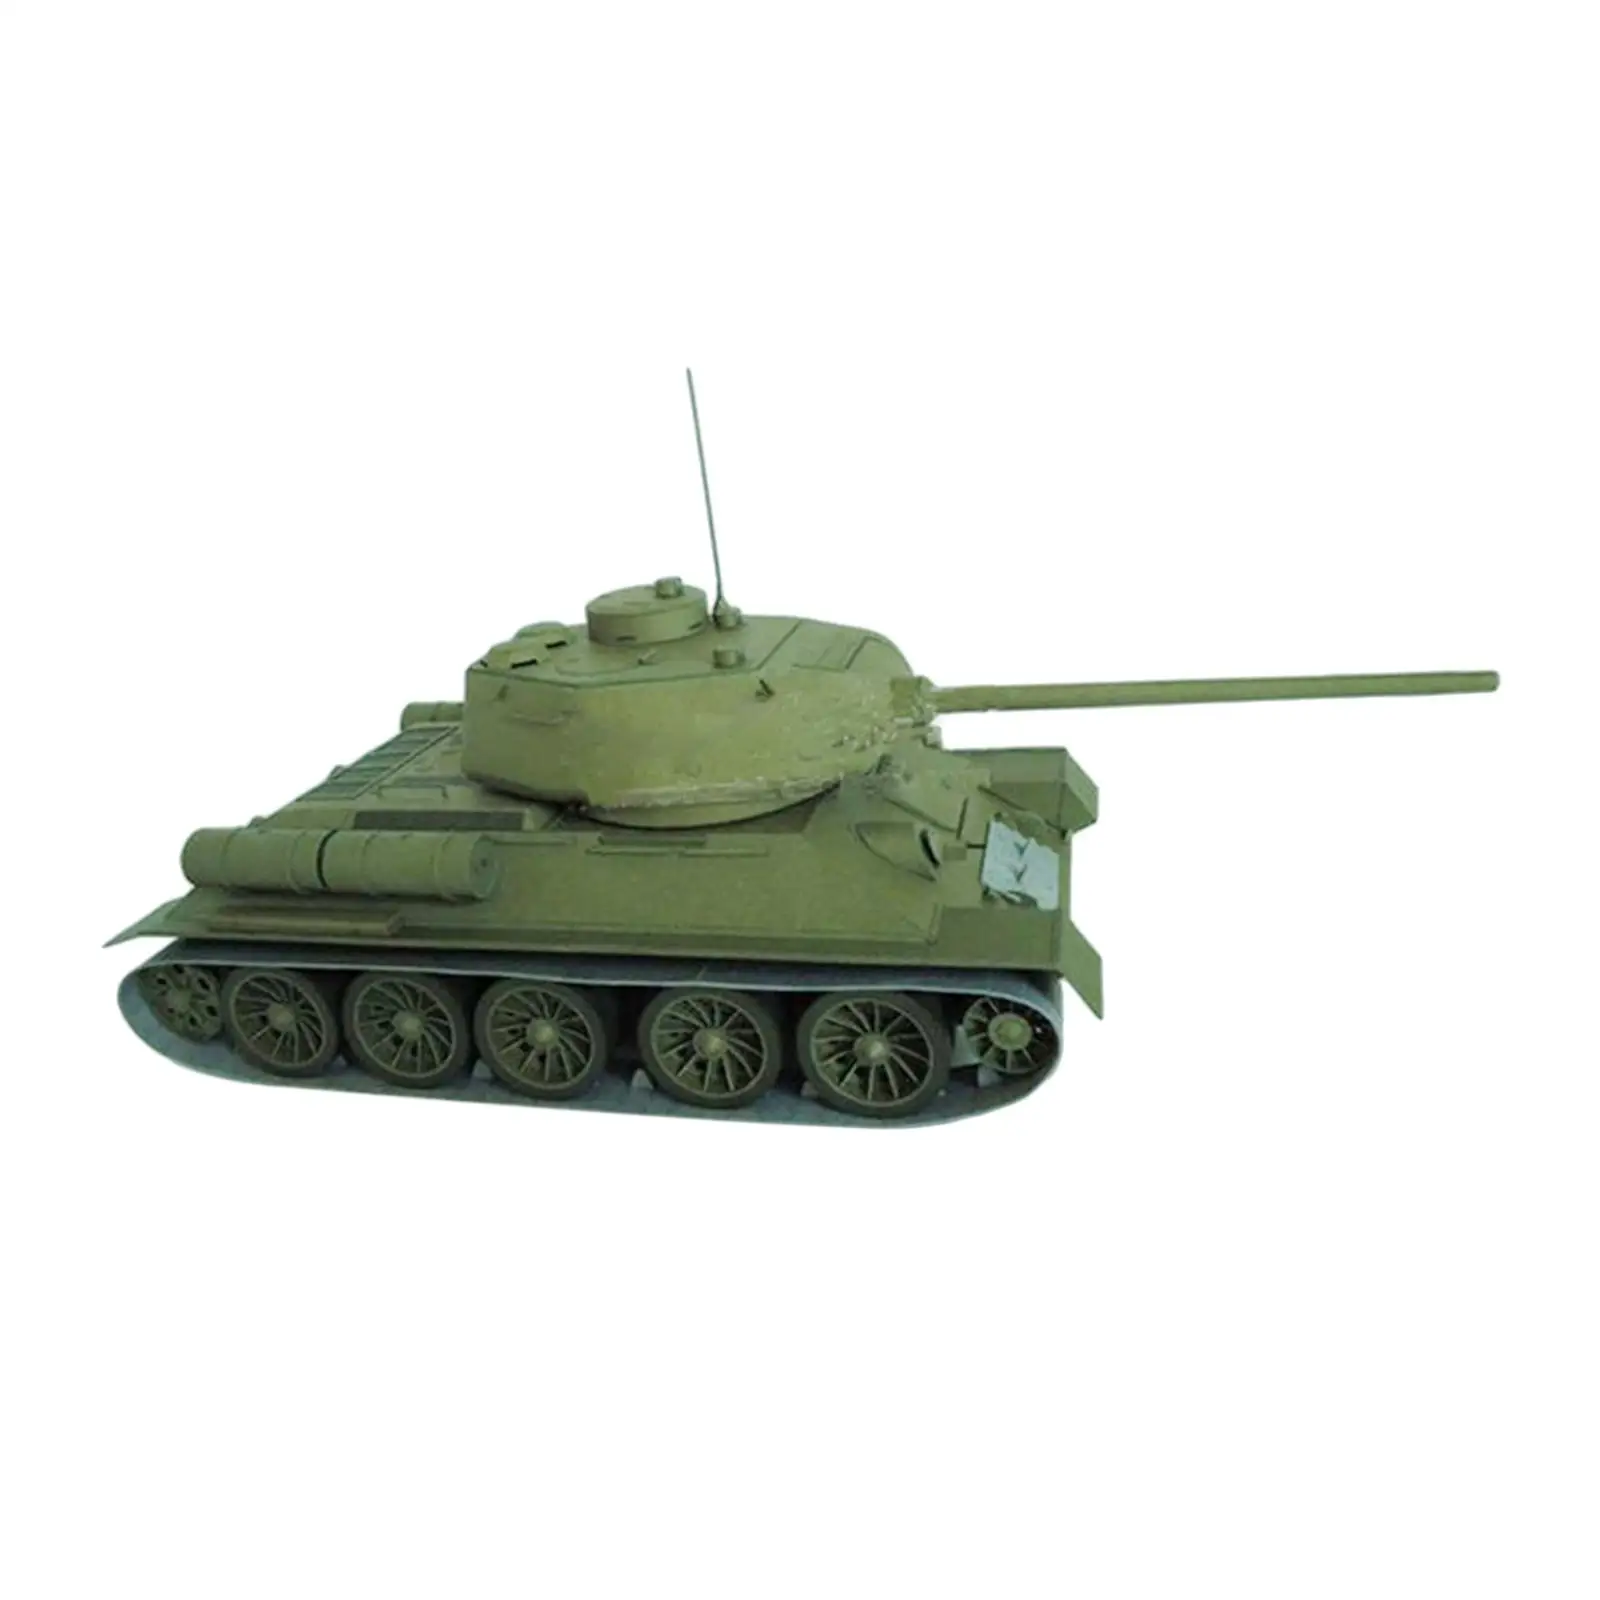 1/25 Tank Model 3D Paper Puzzle Tabletop Decor,Cardboard Collectables Building Kits for Adults Children